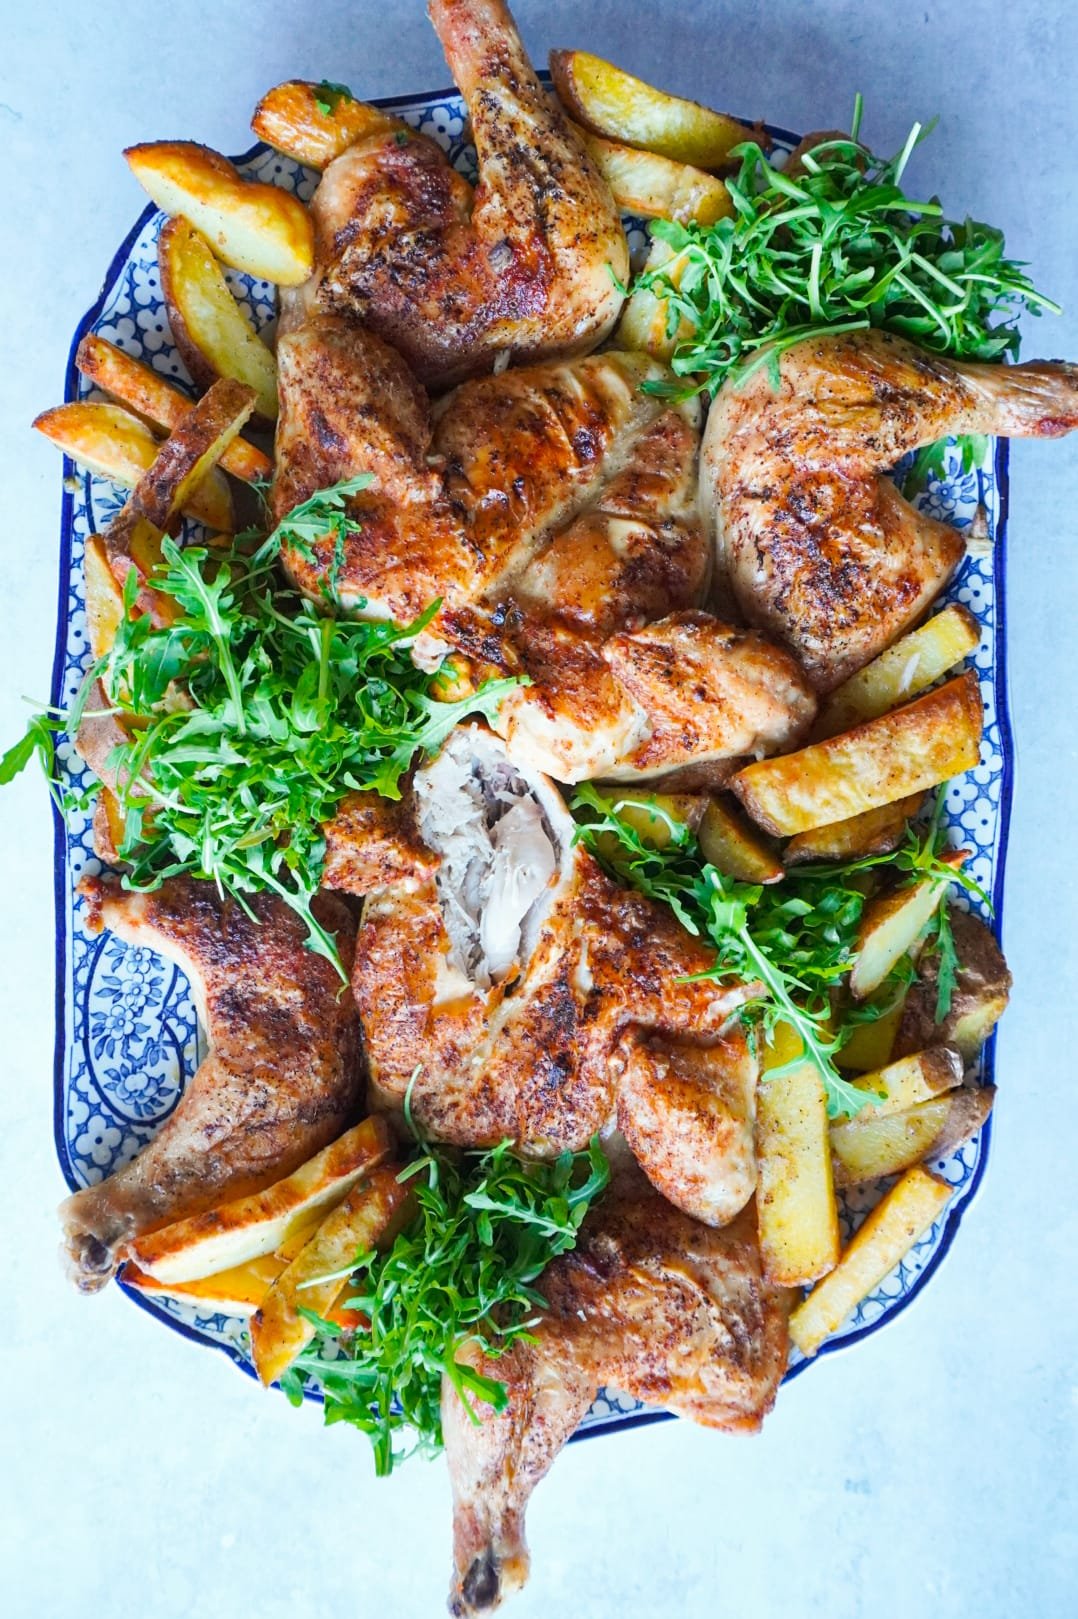 Golden Spatchcock Chicken served with potatoes and greens